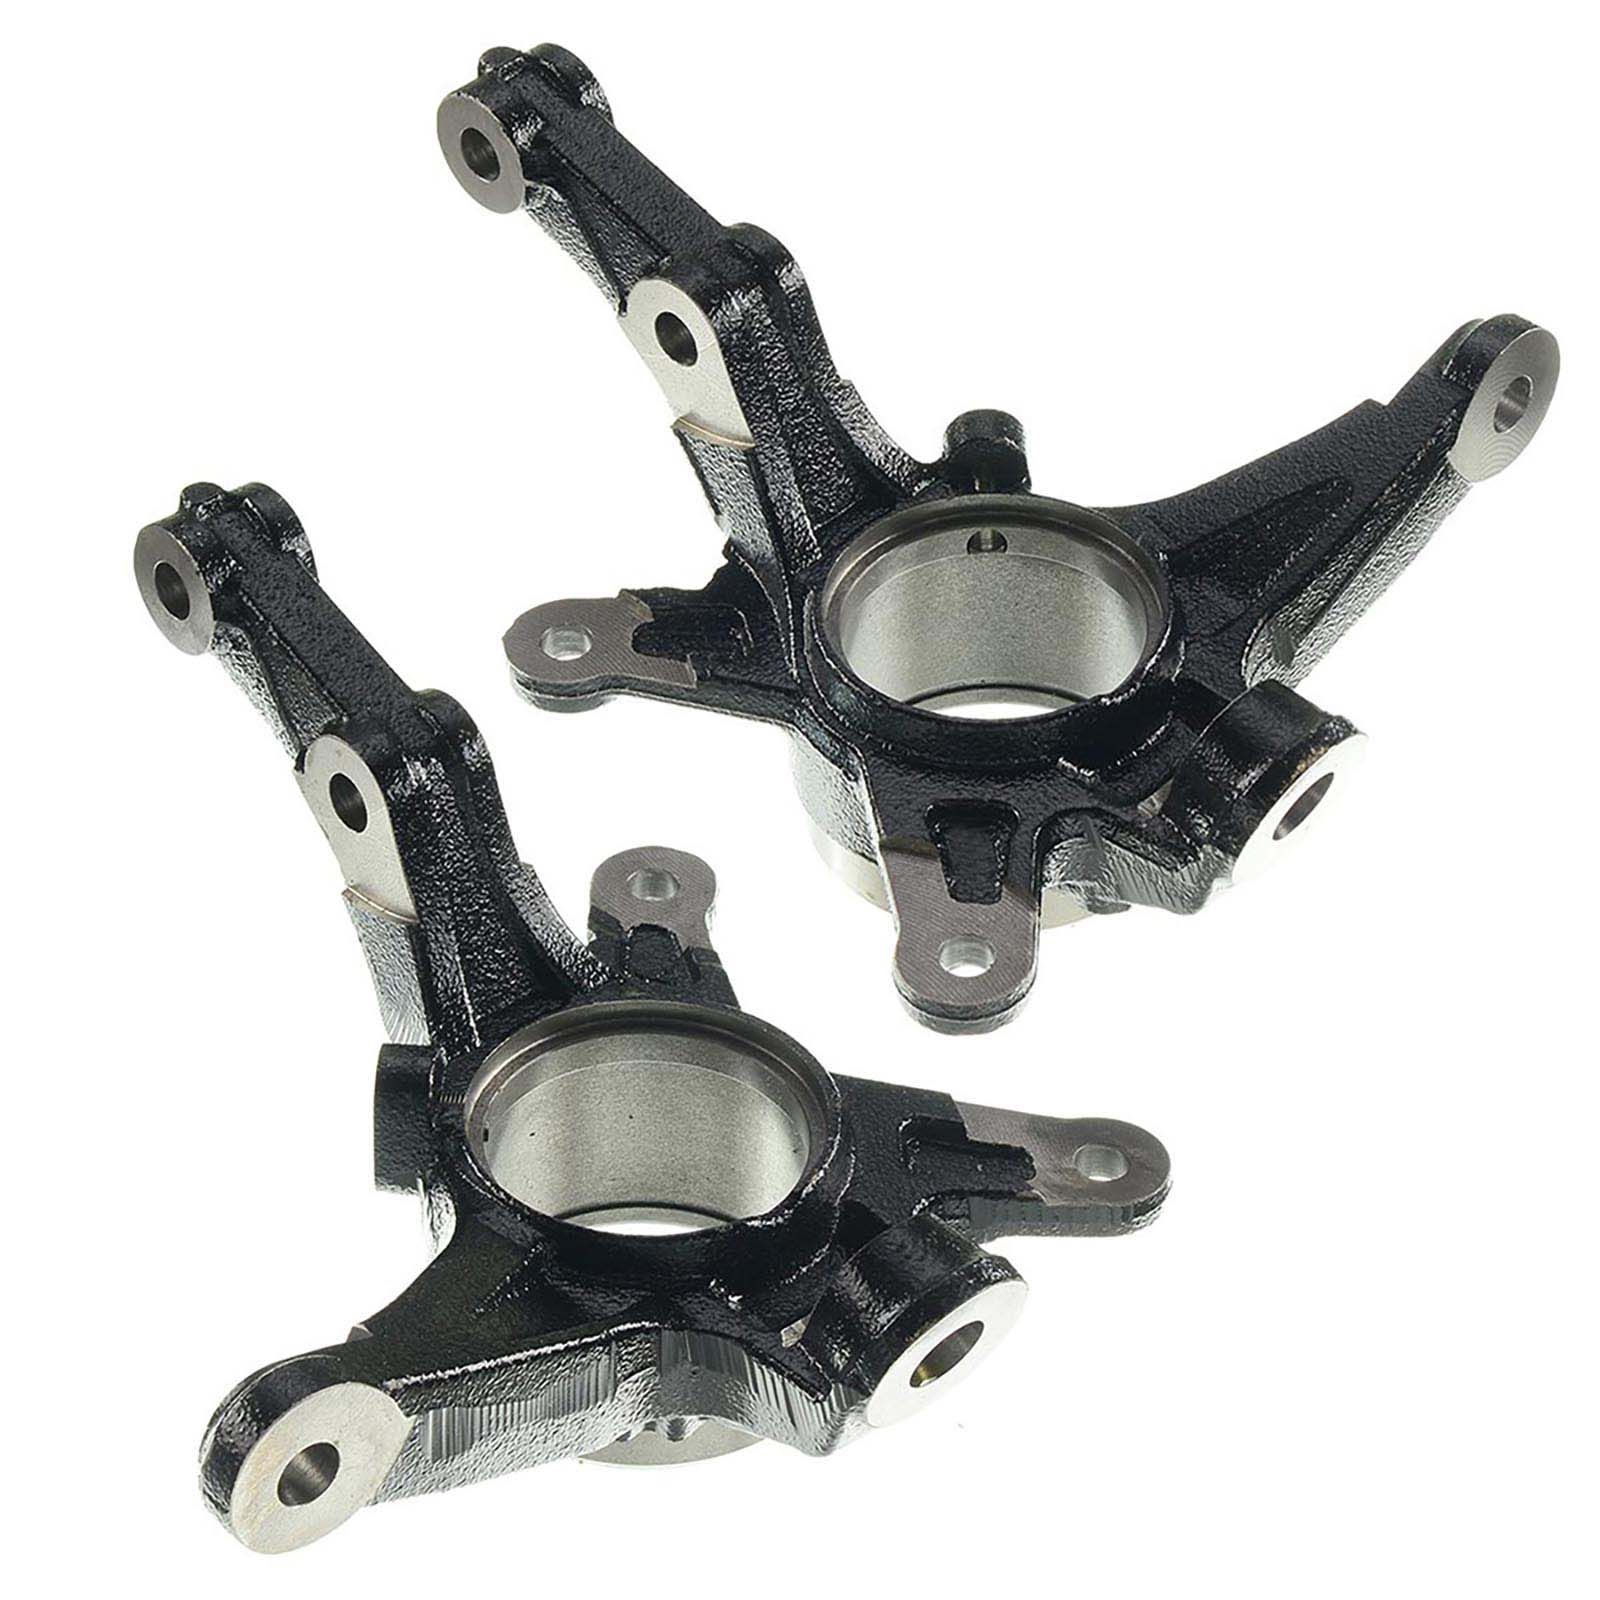 2 Pcs Front Steering Knuckle for Honda Civic Base DX EX GX 2006-2011